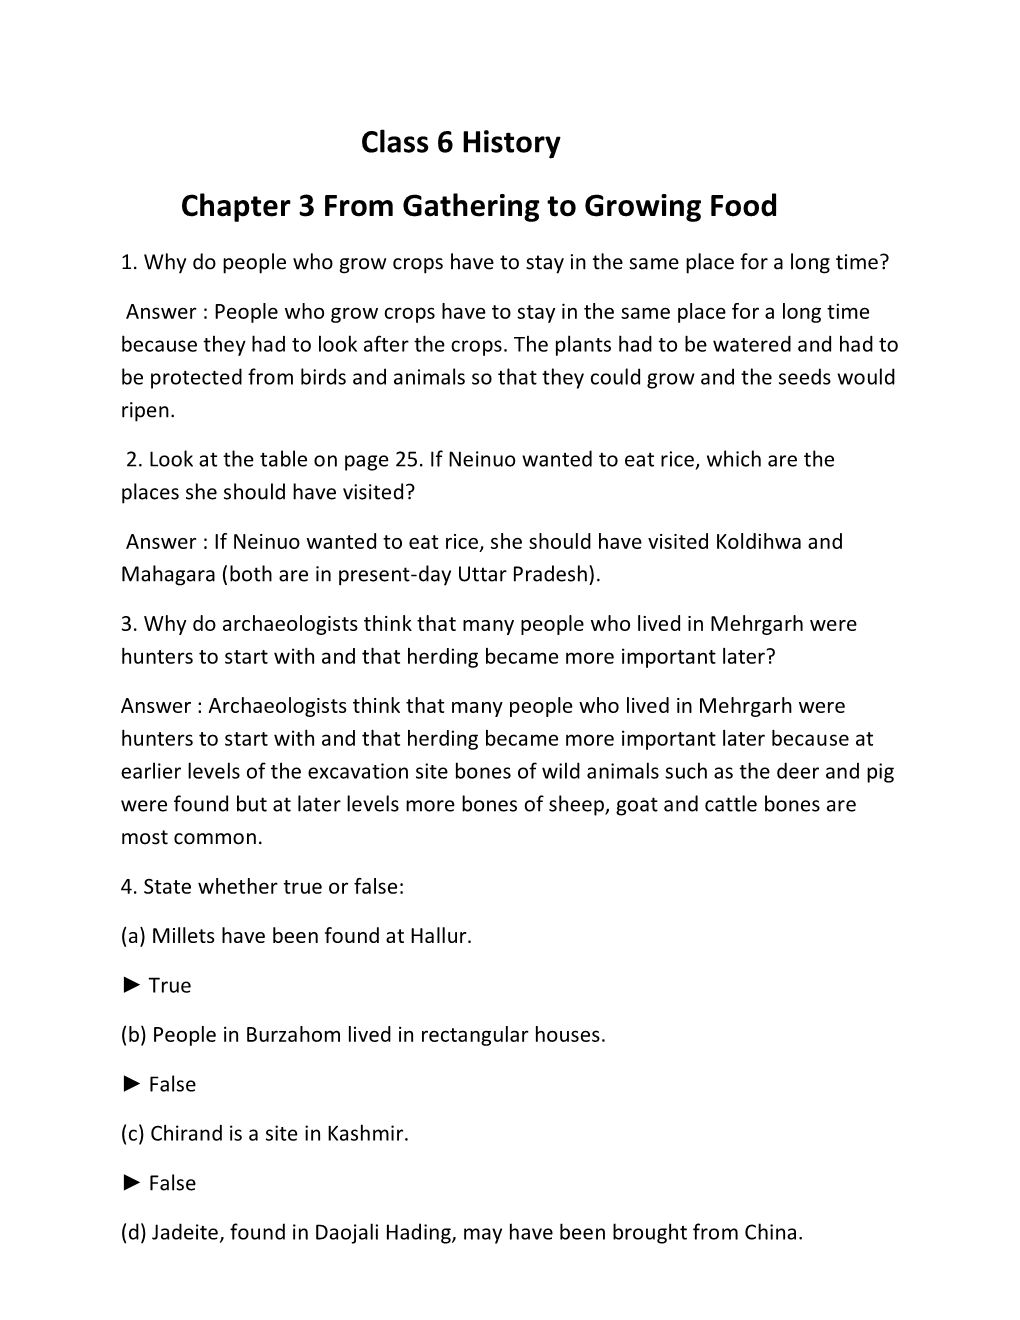 Class 6 History Chapter 3 from Gathering to Growing Food